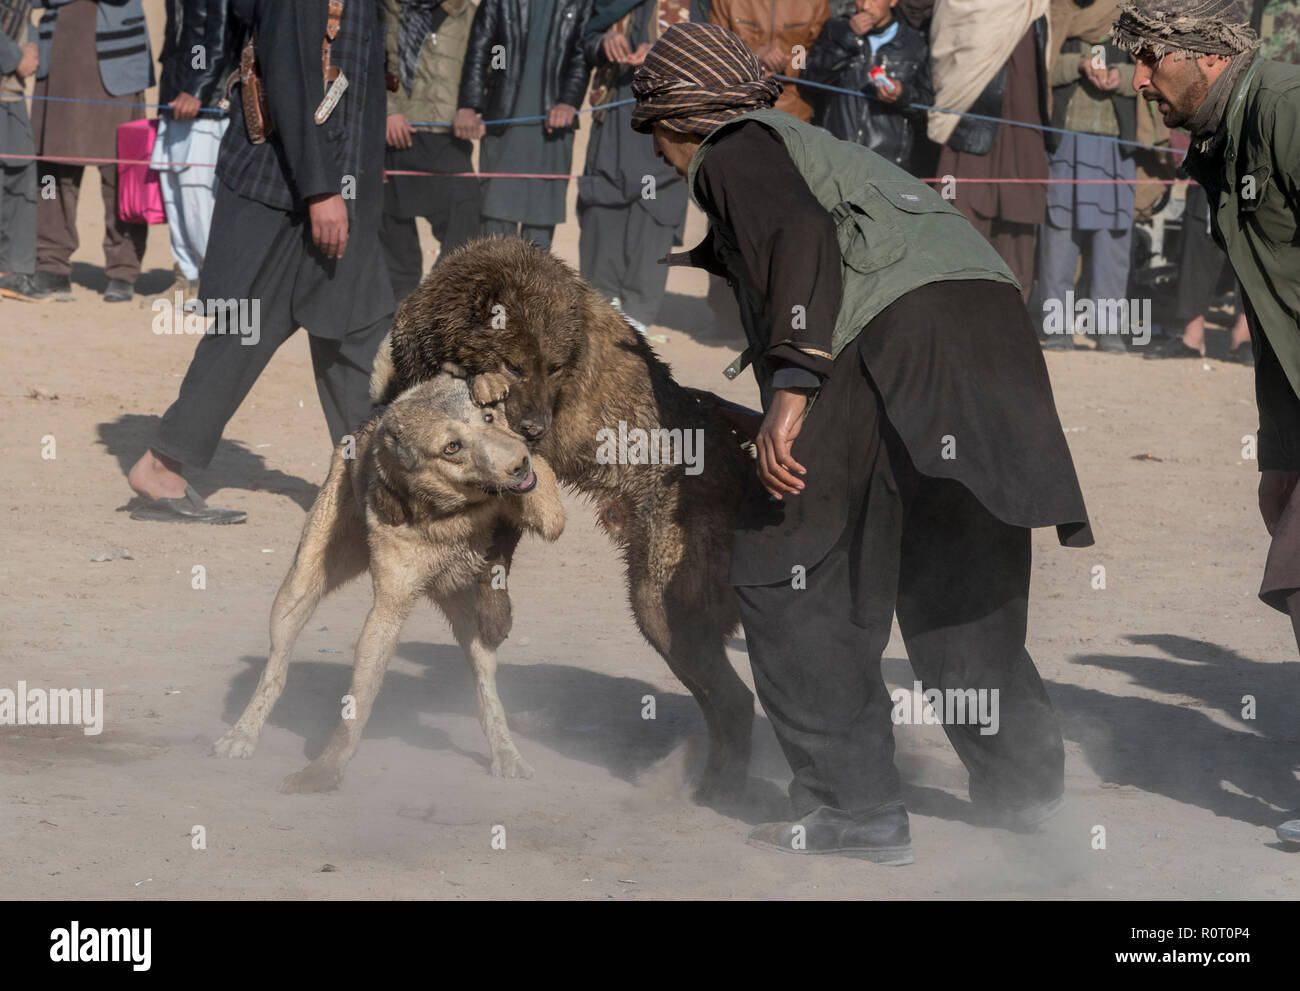 Dogs Fighting With Spectators Betting On Them - Dog Fighting Tournament On Fridays in Mazar-i-Sharif, Balkh Province, Afghanistan. Stock Photo